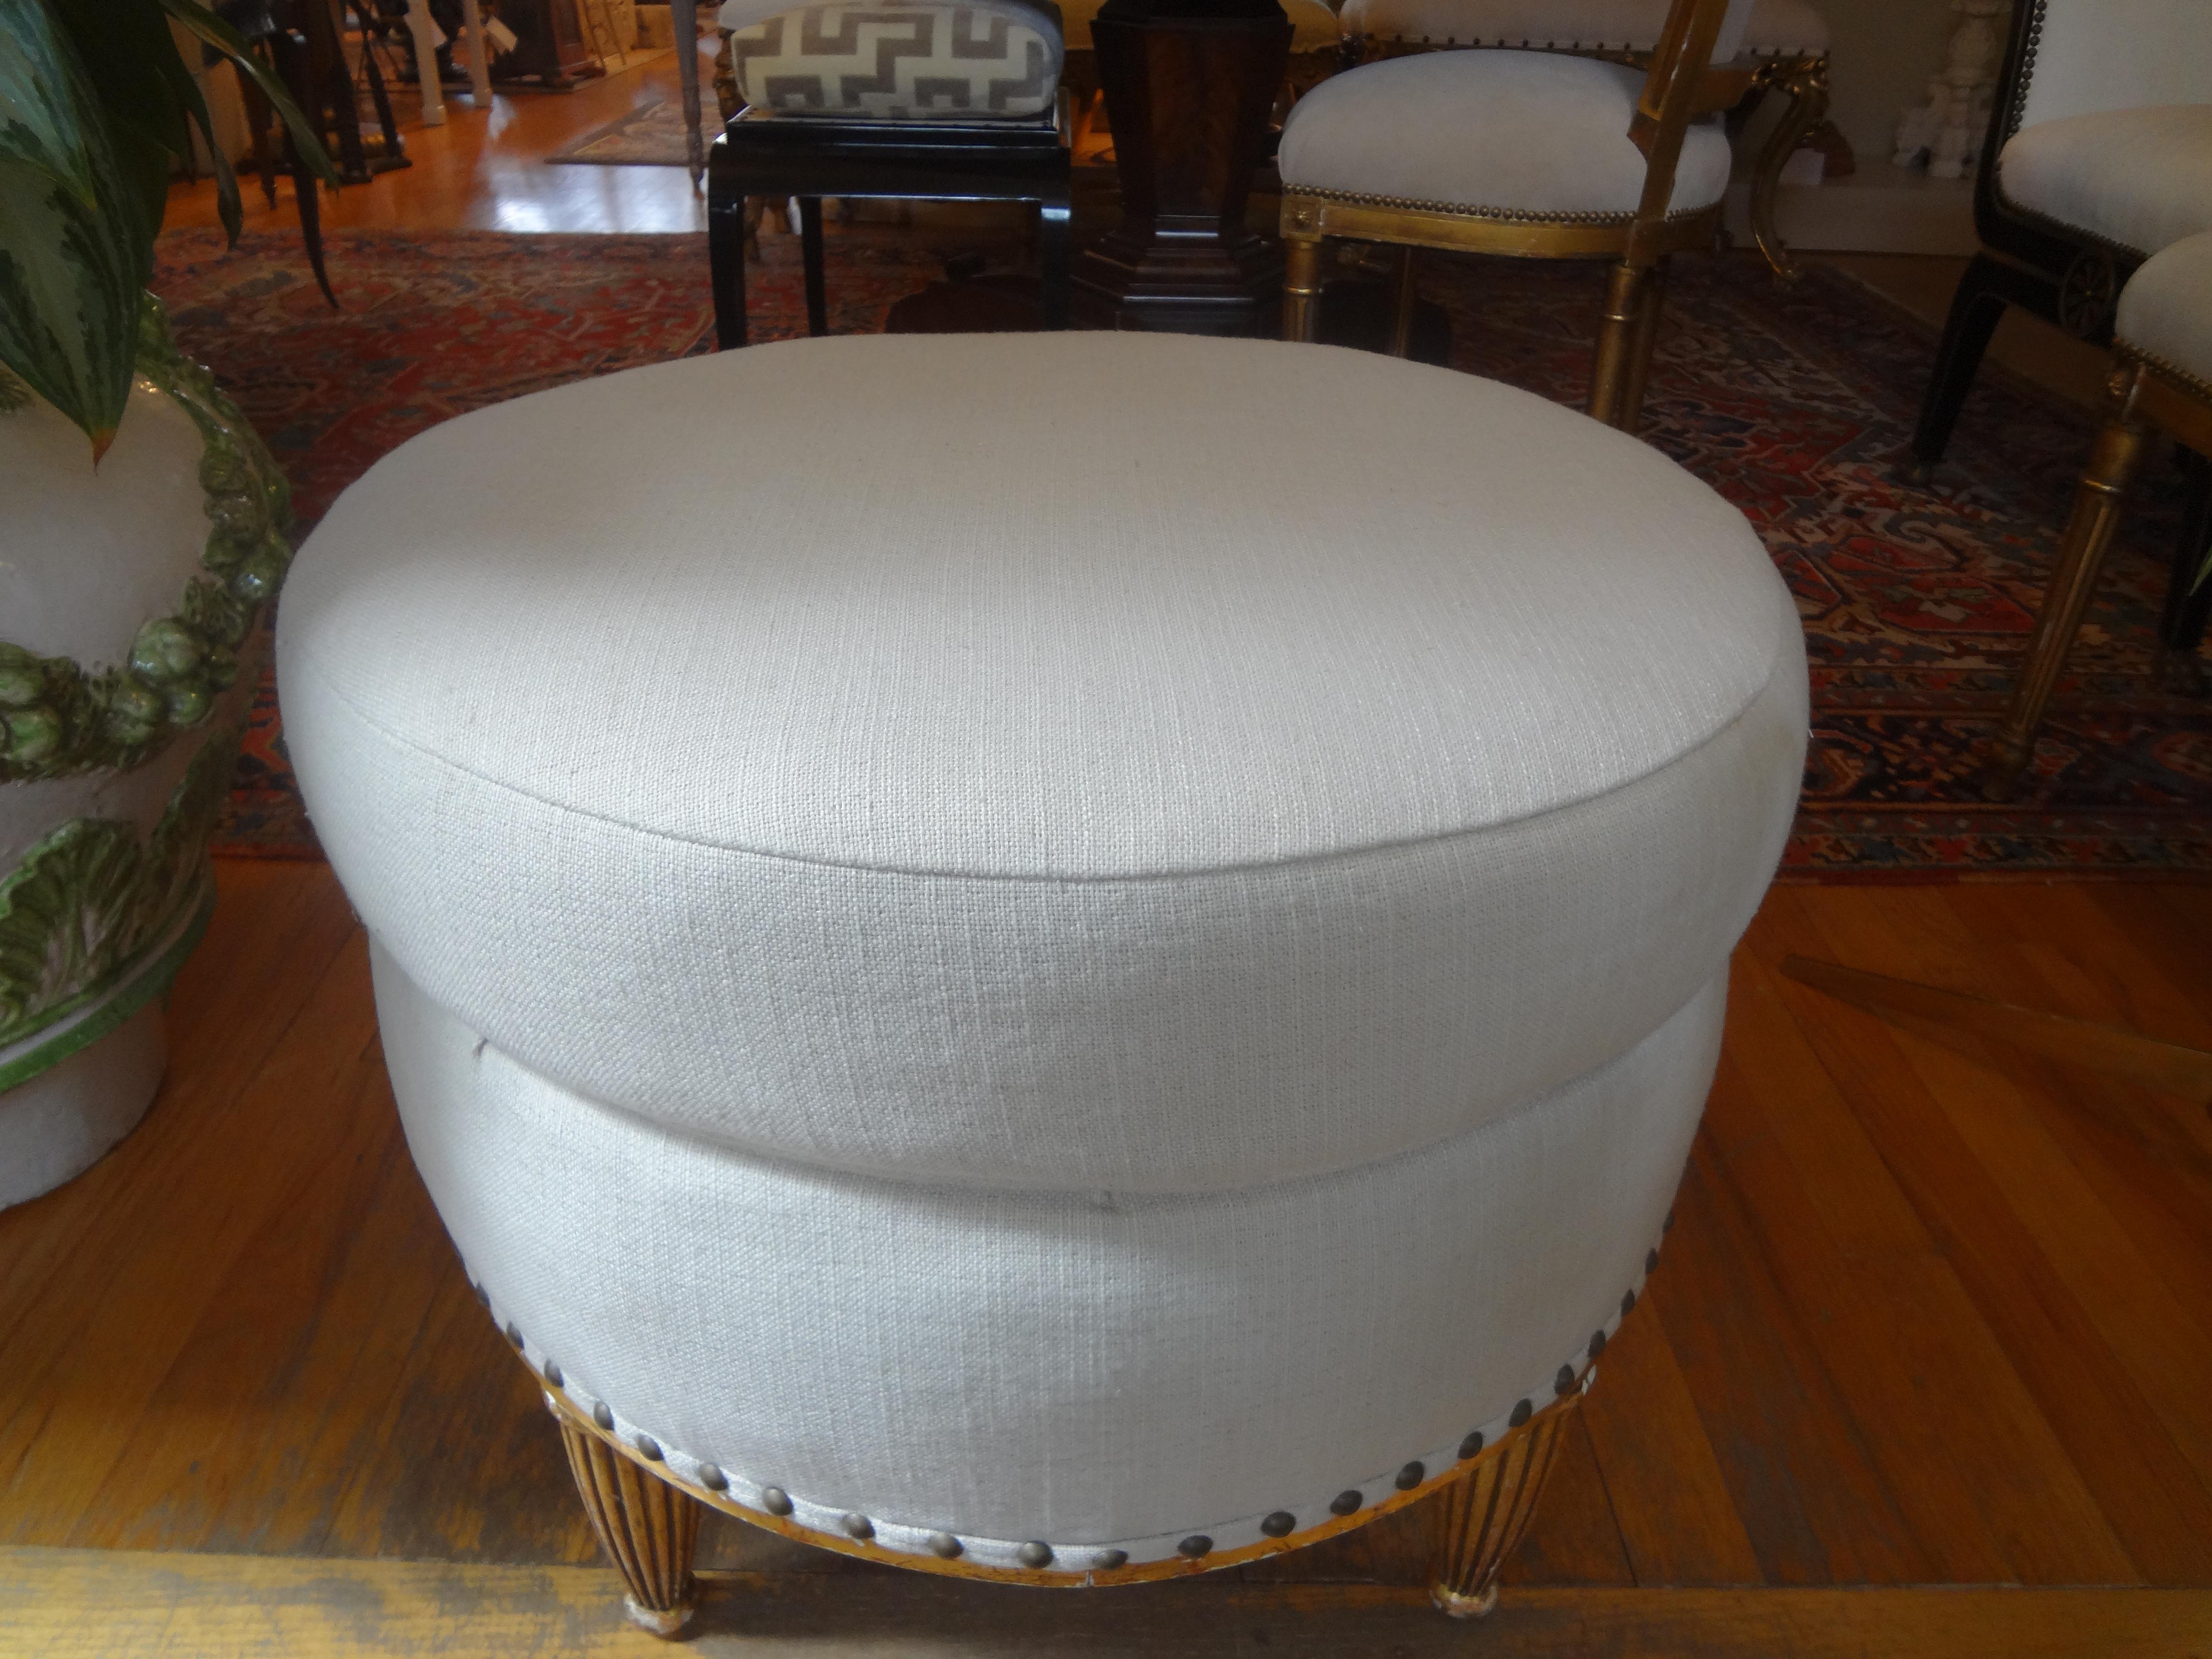 Stunning antique French Louis XVI style giltwood bench, ottoman, stool or pouf with fluted legs. This beautiful French gilt wood pouf has been professionally upholstered in cream linen with spaced brass nailhead detail.